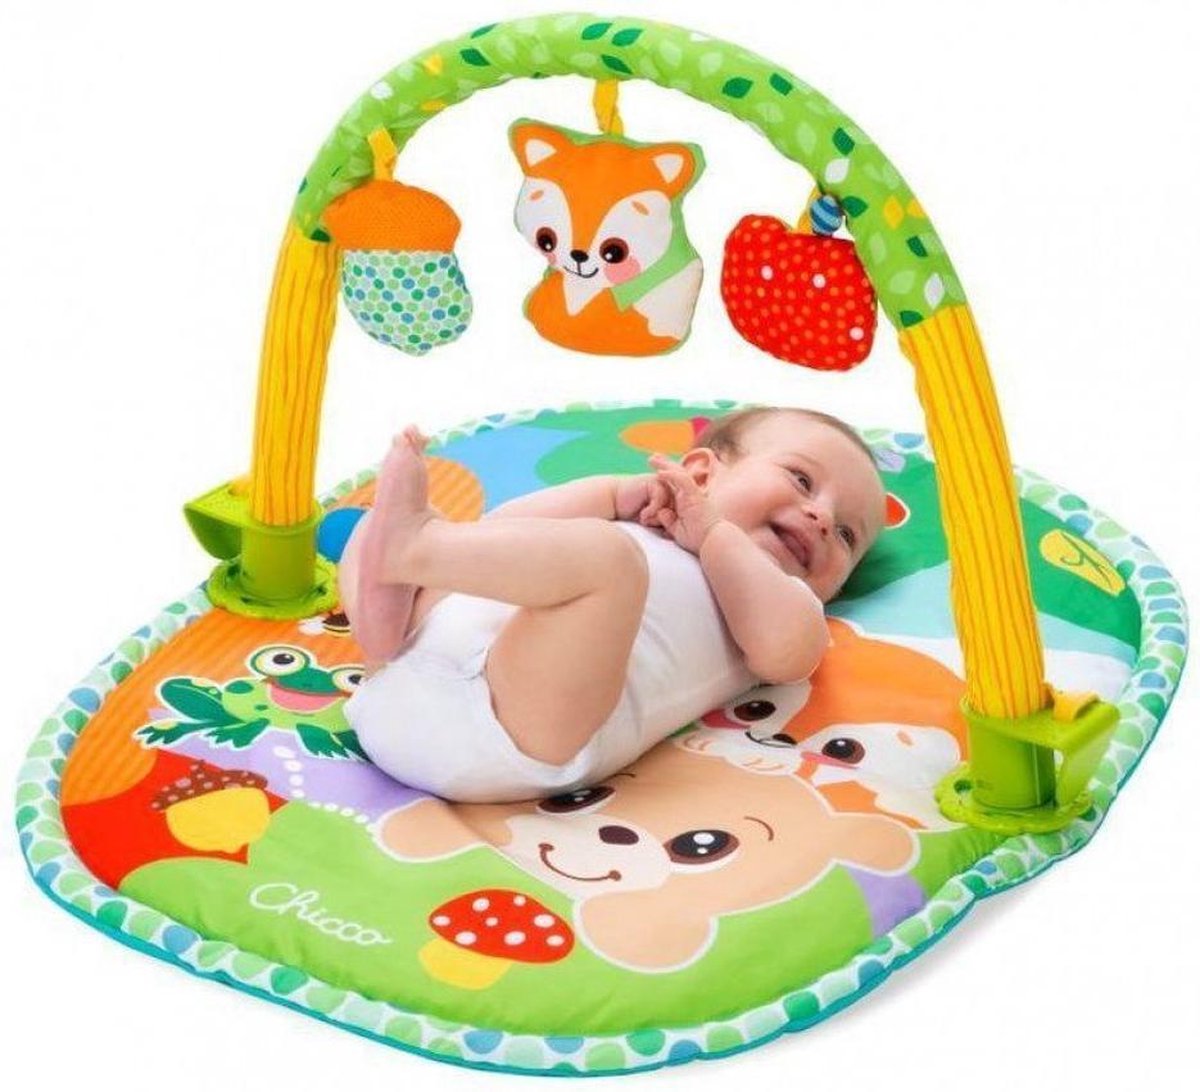 Chicco 3in1 activity playgym